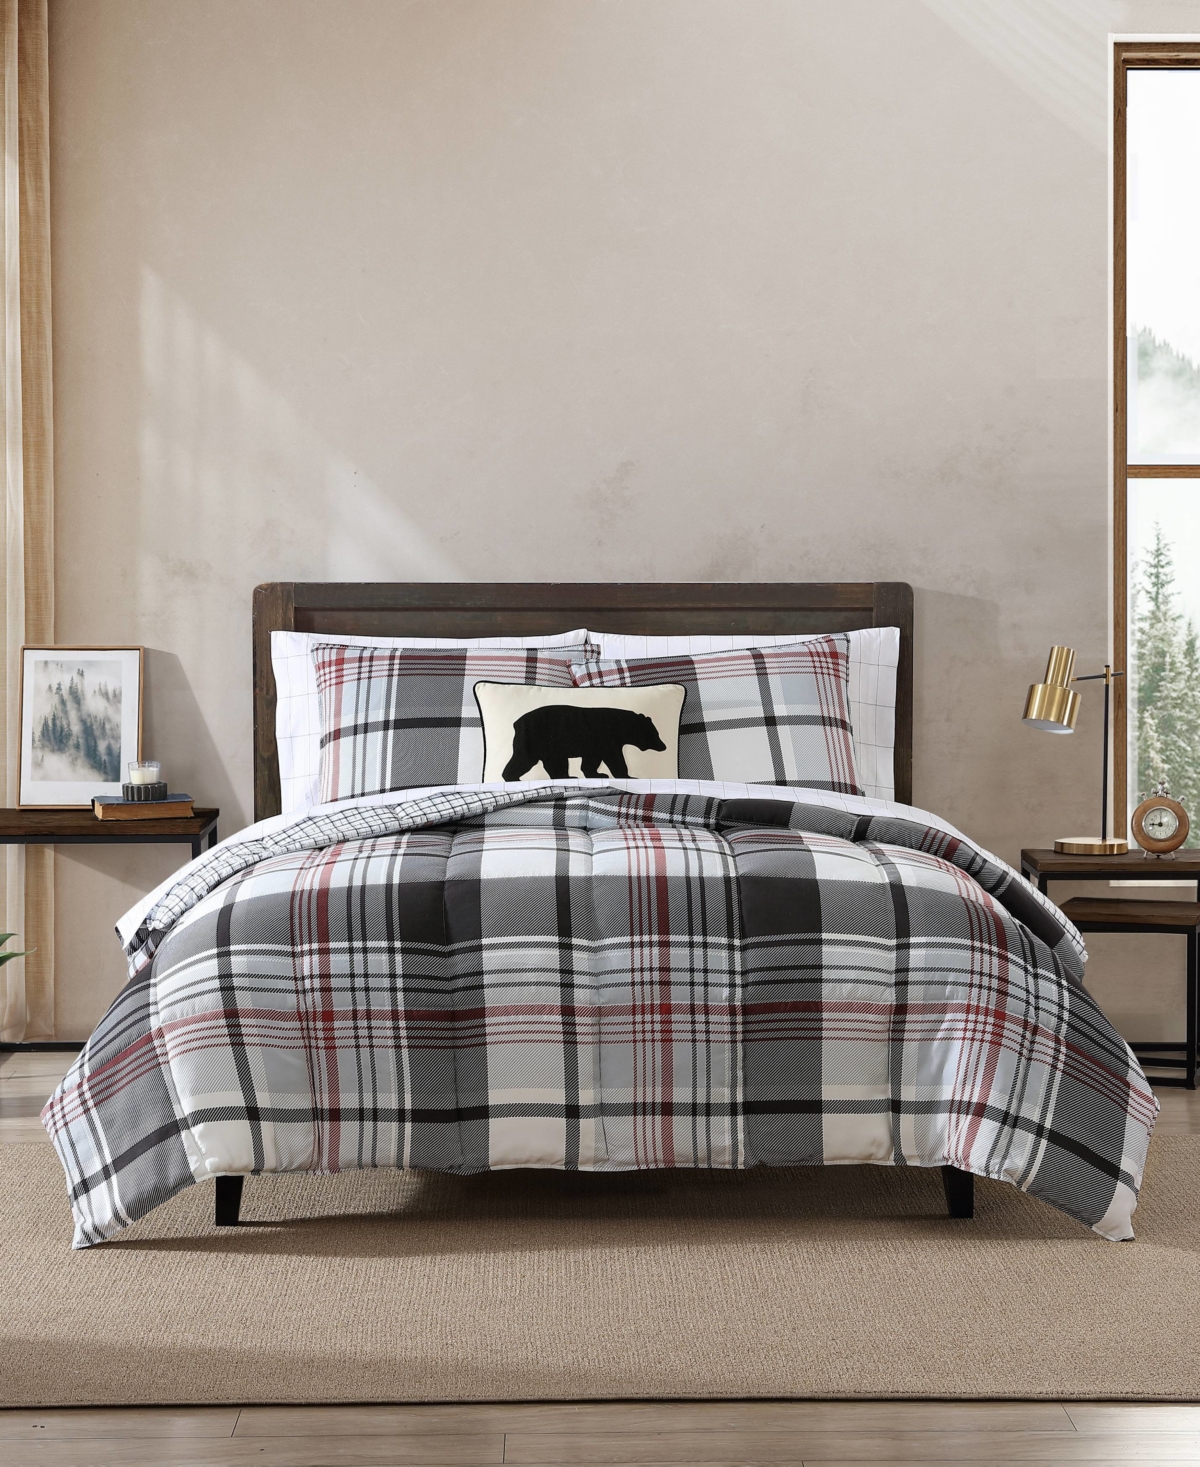 Eddie Bauer Normandy Plaid Micro Suede Reversible 3 Piece Duvet Cover Set, Full/queen In Black Red